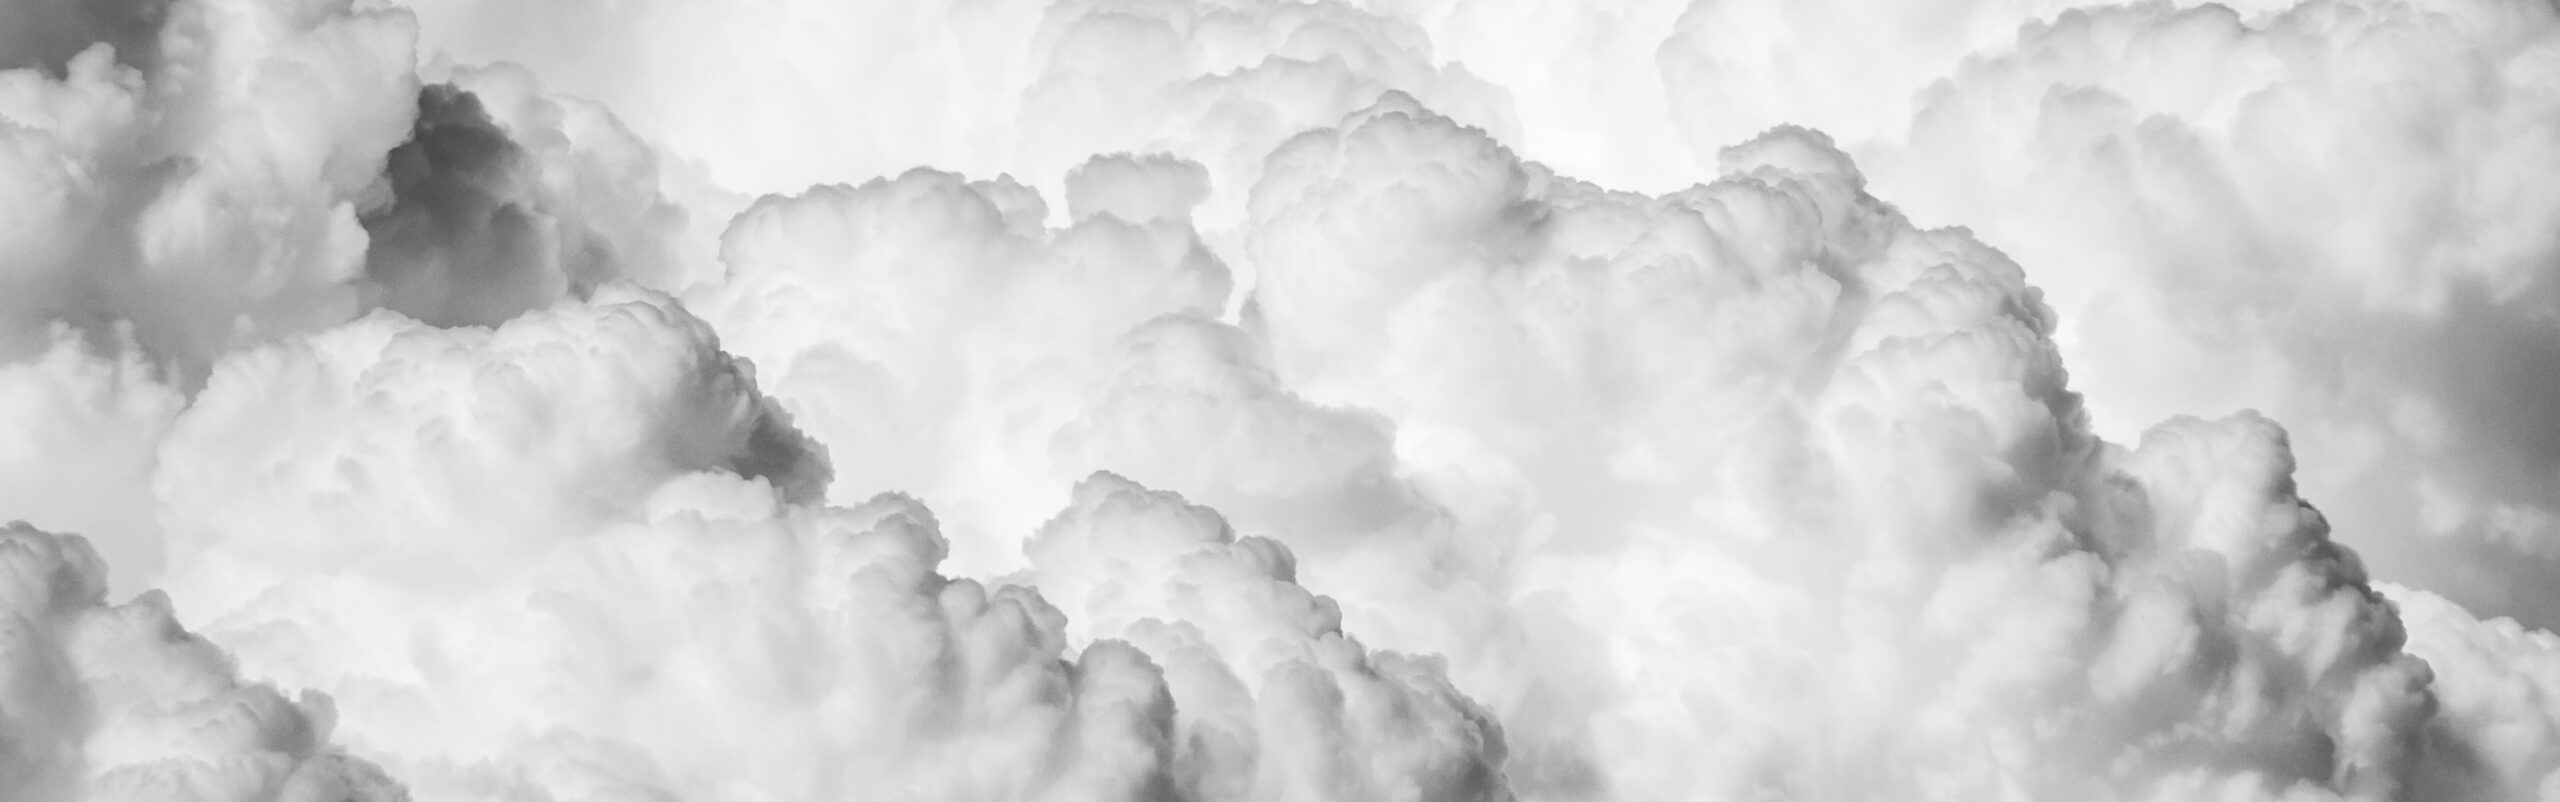 A photo of large white clouds